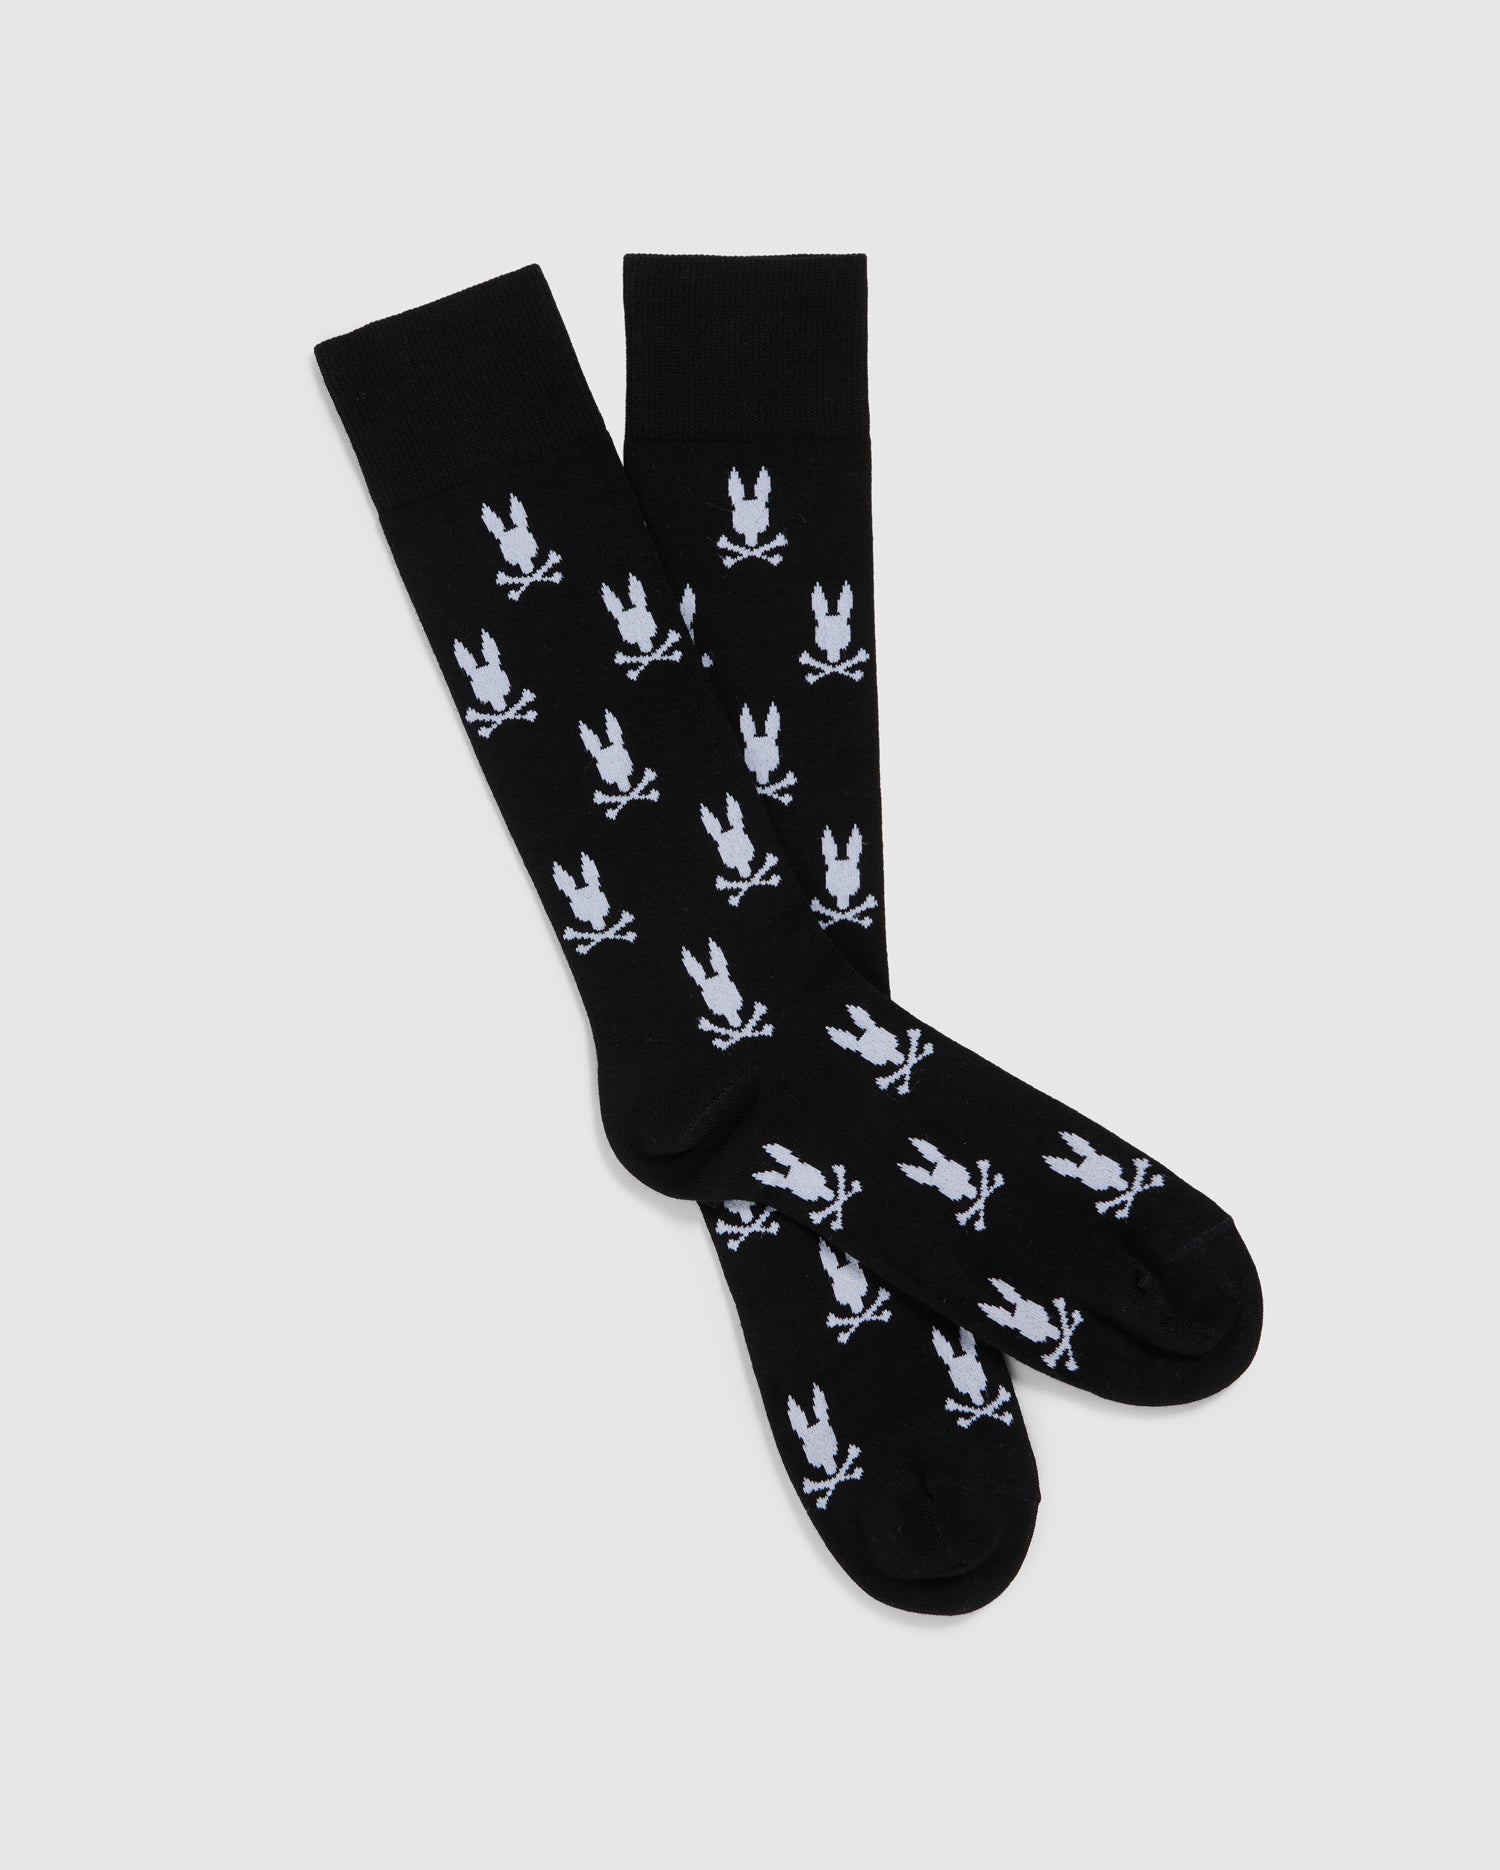 A pair of MENS DRESS SOCK - B6F750C200 from Psycho Bunny with a repeated bunny pattern in white logos throughout. Made from luxurious Peruvian Pima cotton, the socks are arranged in a crisscross pattern against a plain white background, highlighting the contrast between the black fabric and white designs.